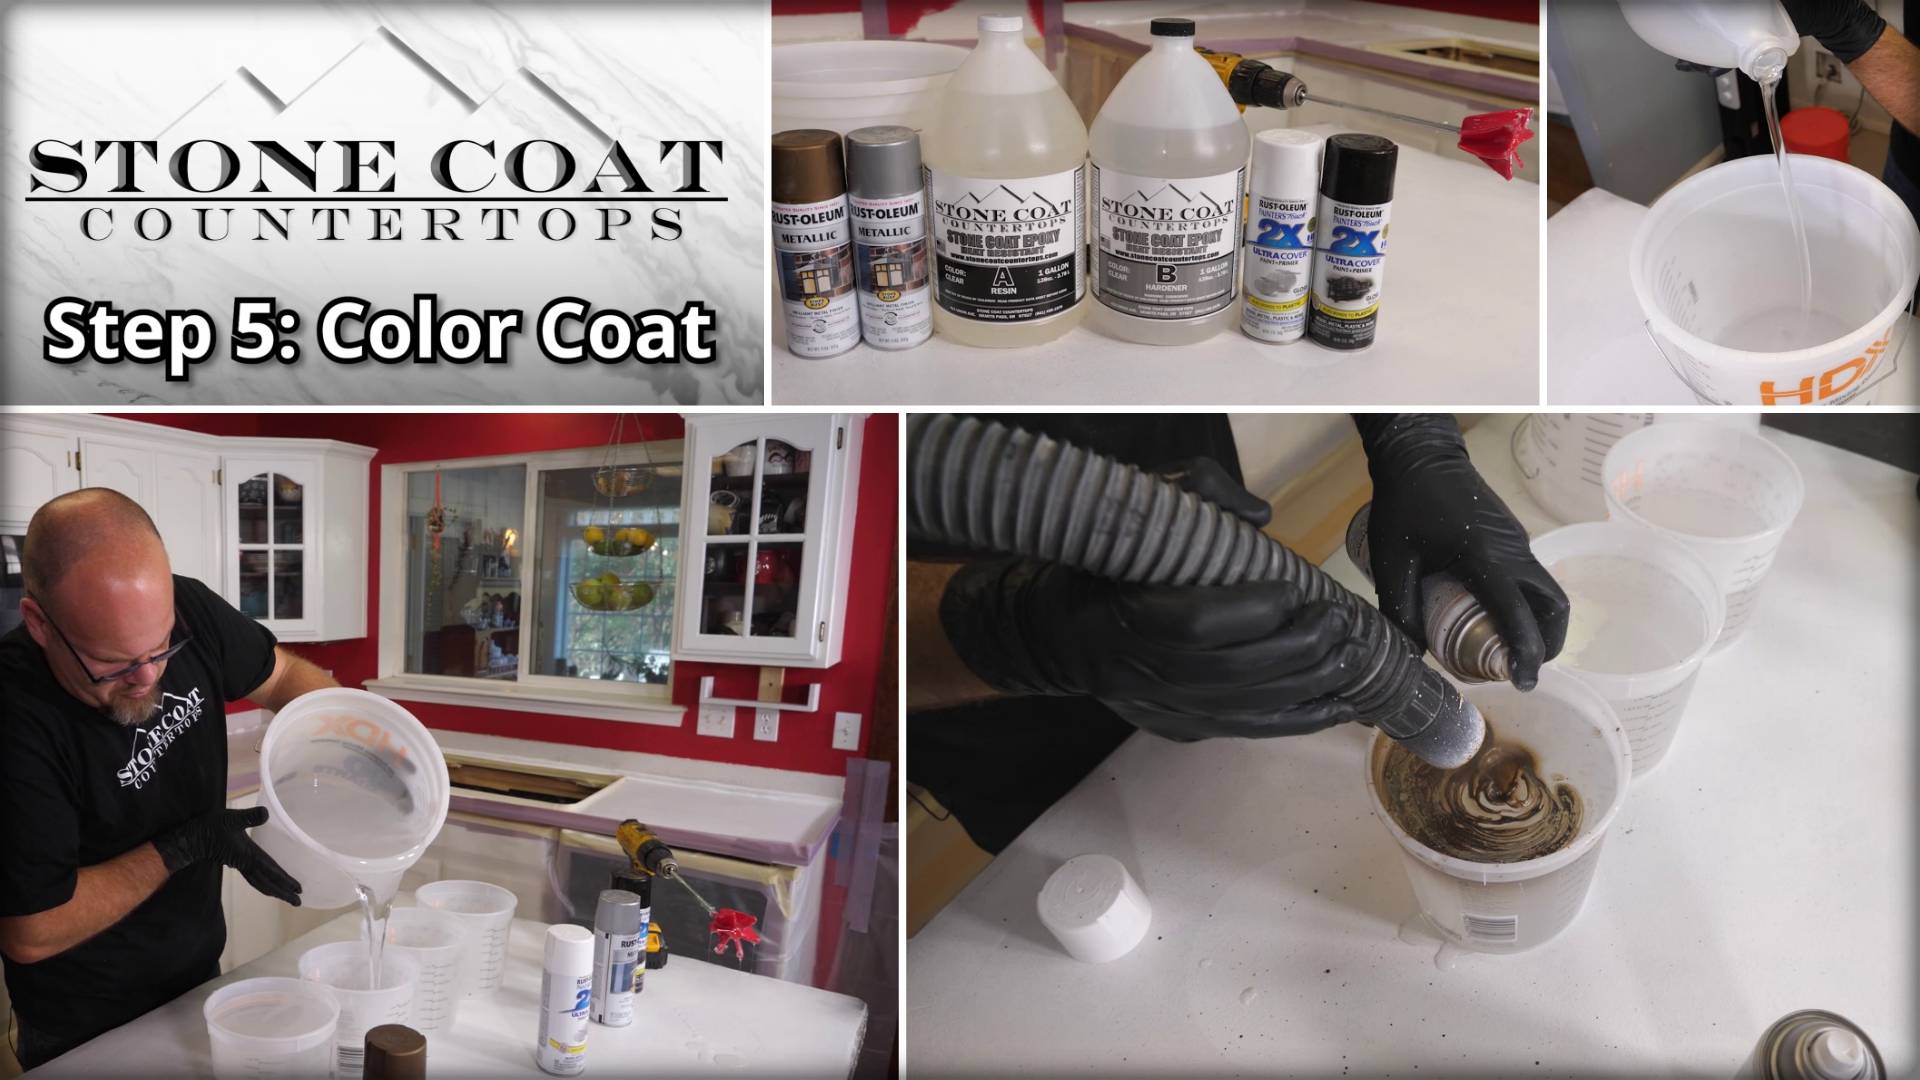 Step 1: Color Mixing - Prepare epoxy at 1:1 ratio, add color with spray paint or metallic powder in layers for your countertop.